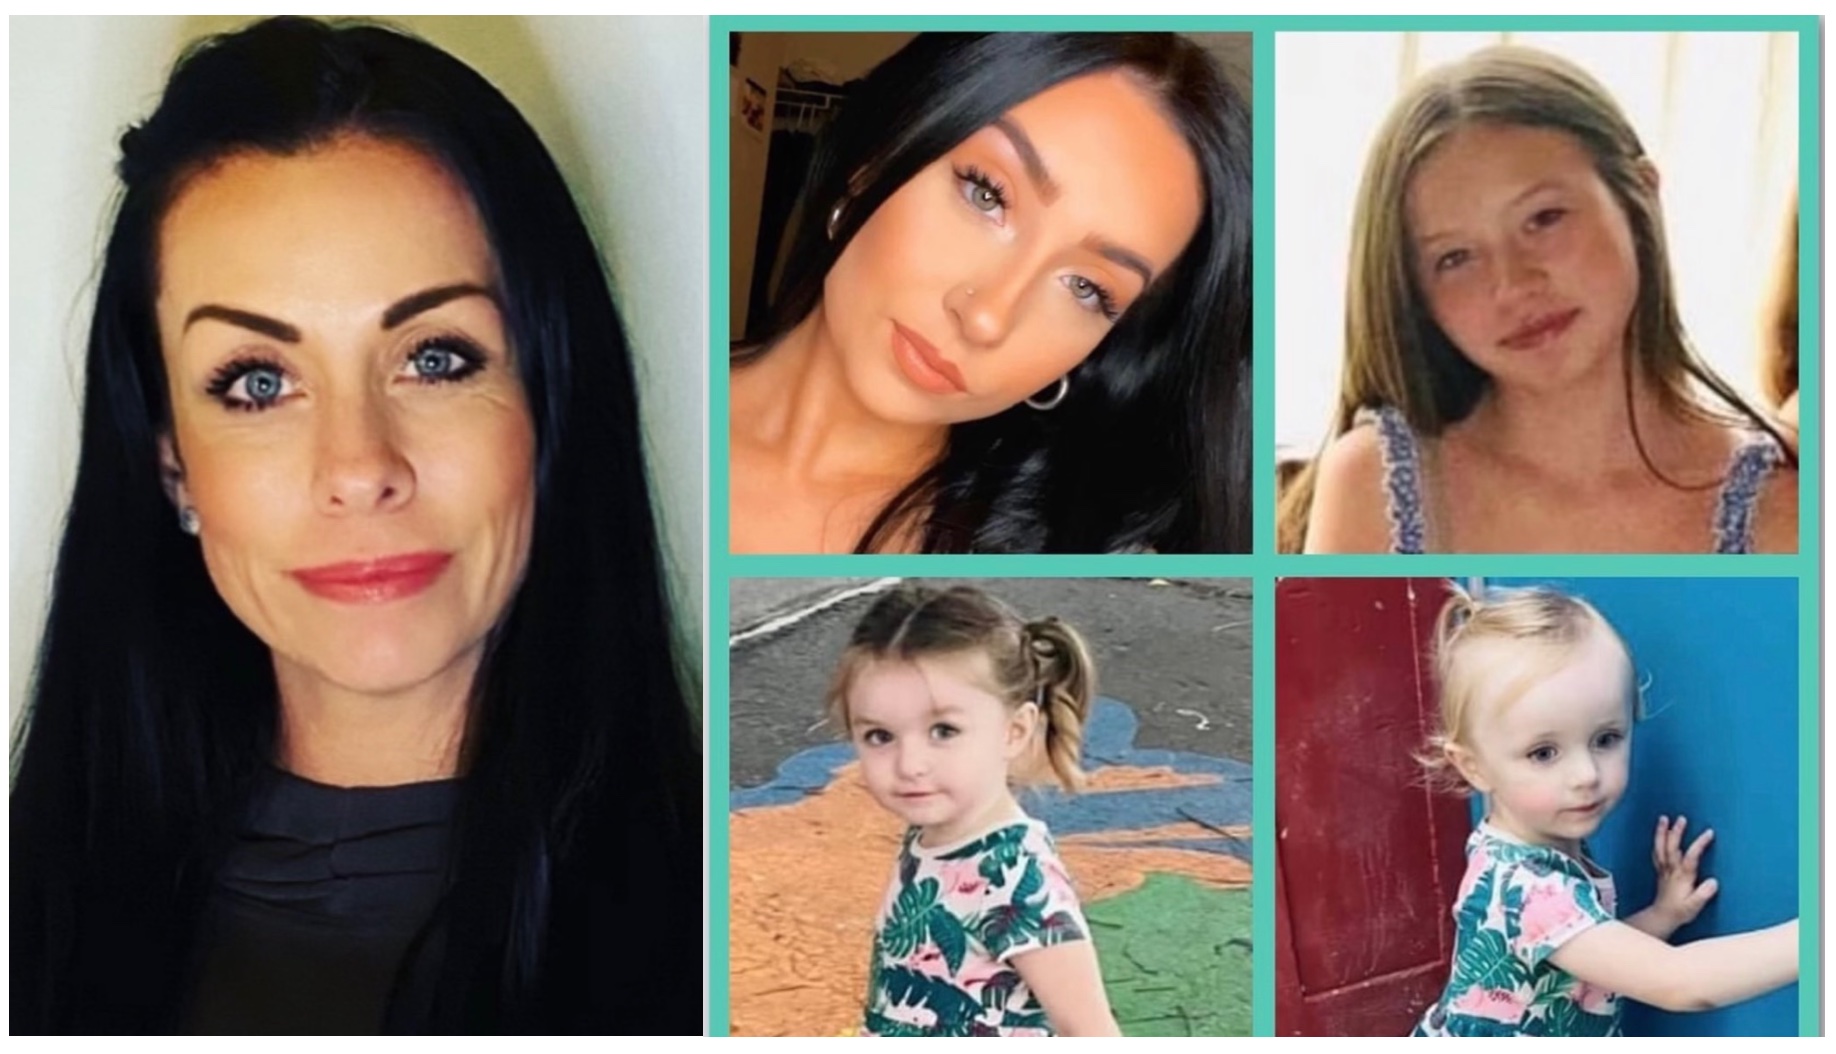 Shannon Lundin (left) and her daughters (clockwise in collage) Laneigh, Oliviah, Tatum, and Brynn